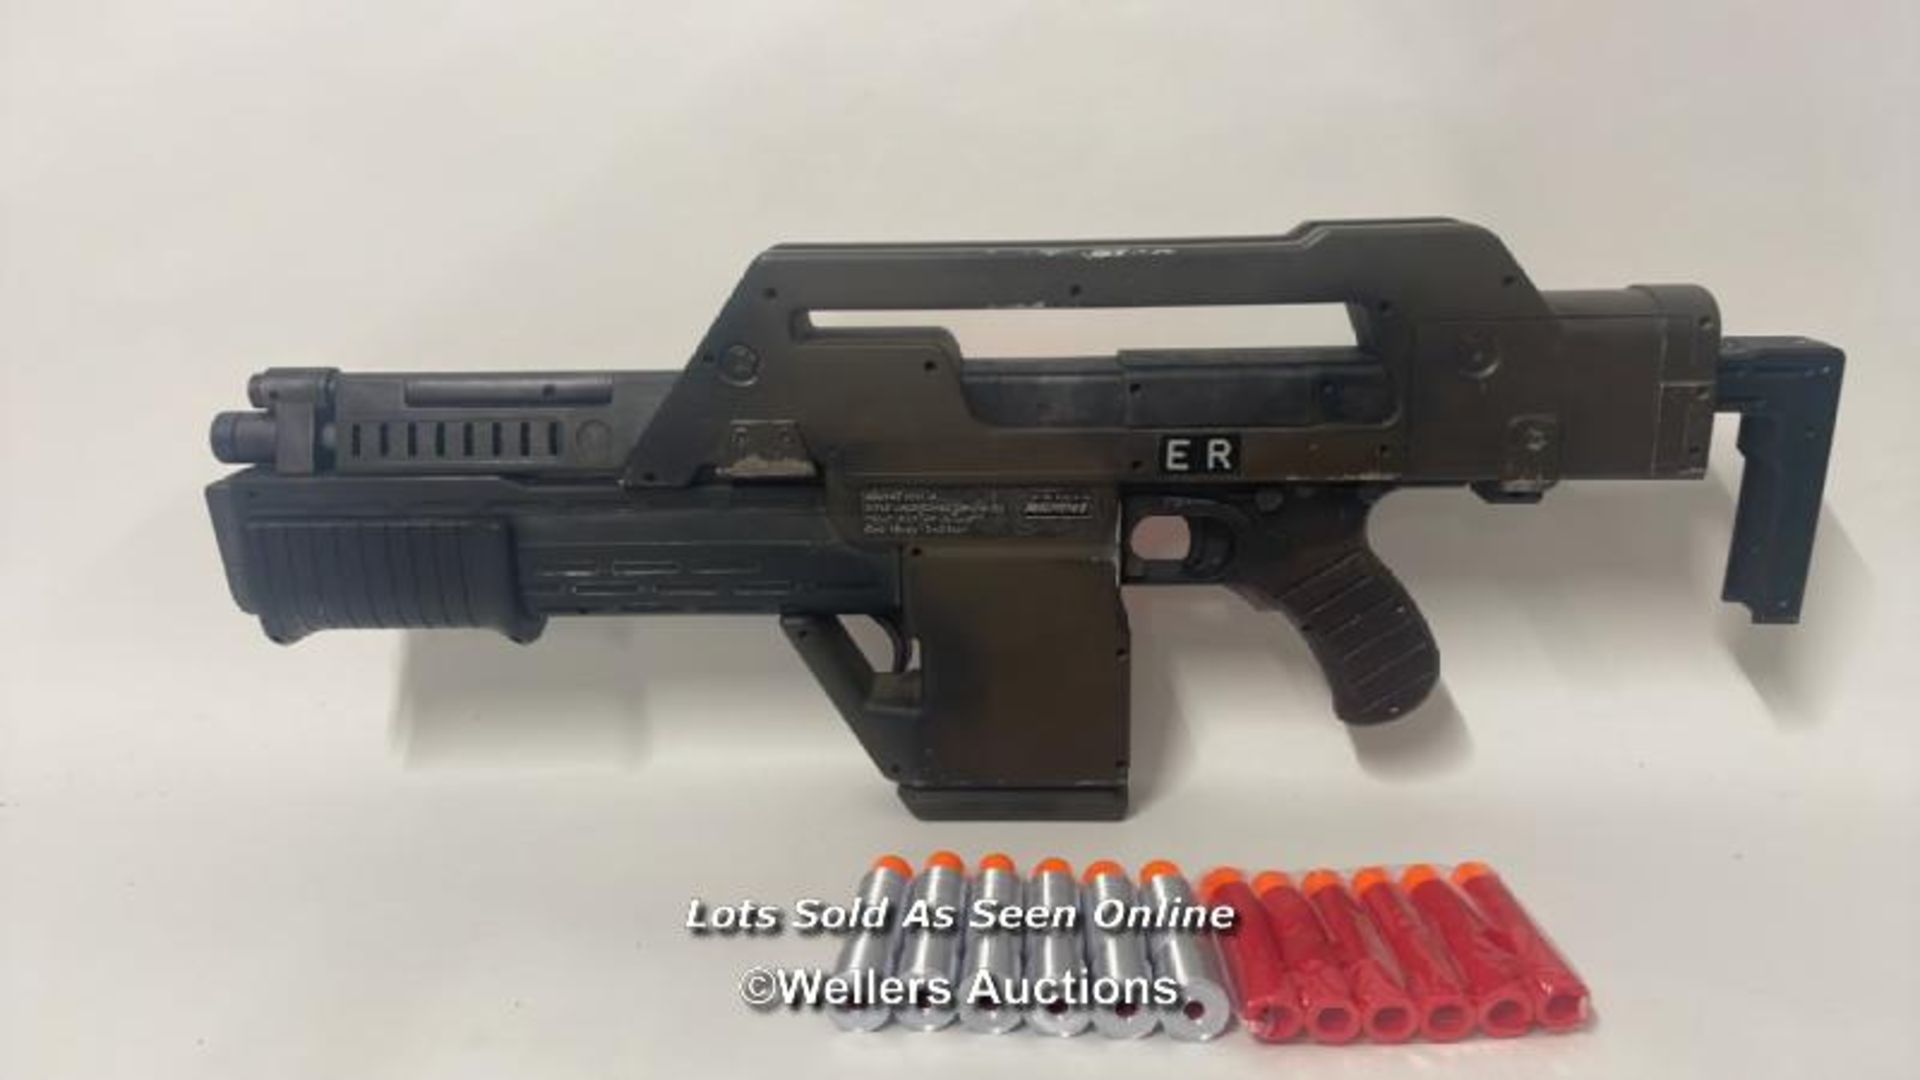 Alien - M41A pulse rifle fully working Nerf gun, with digital ammo countdown 0-99, rapid fire - Image 5 of 12